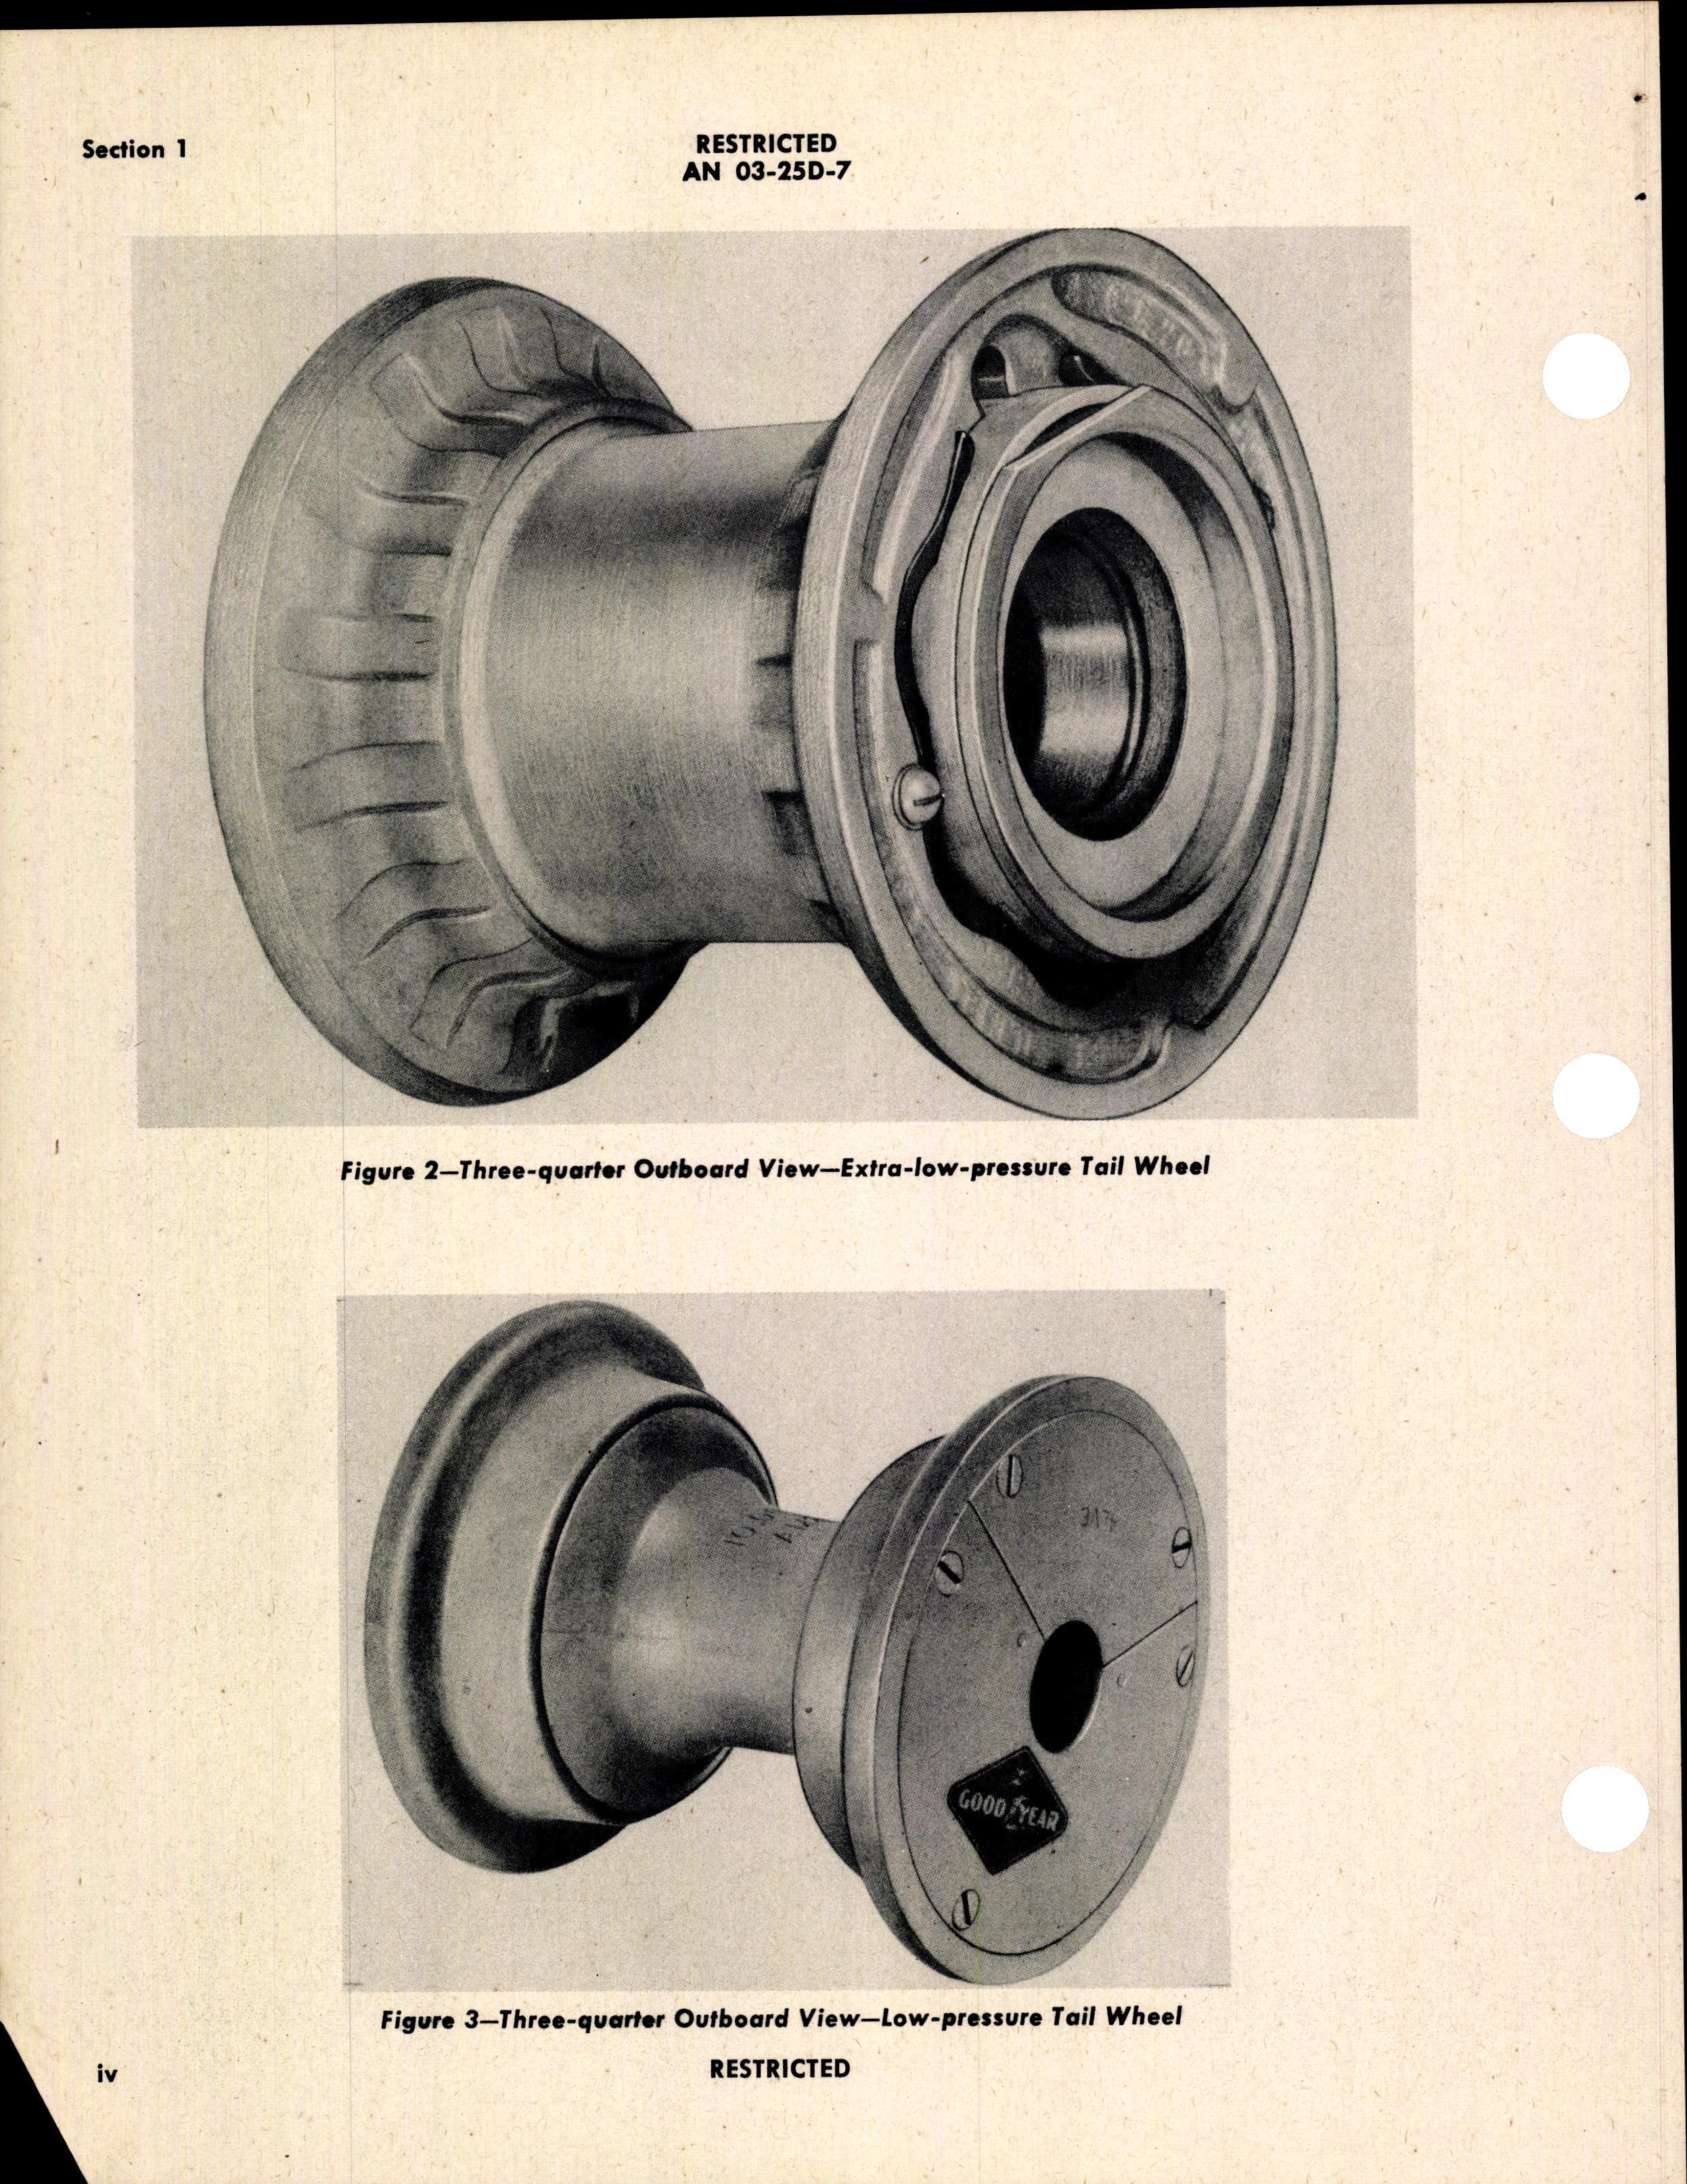 Sample page 6 from AirCorps Library document: Operation, Service, & Overhaul Instructions with Parts Catalog for Goodyear Nose and Tail Wheels